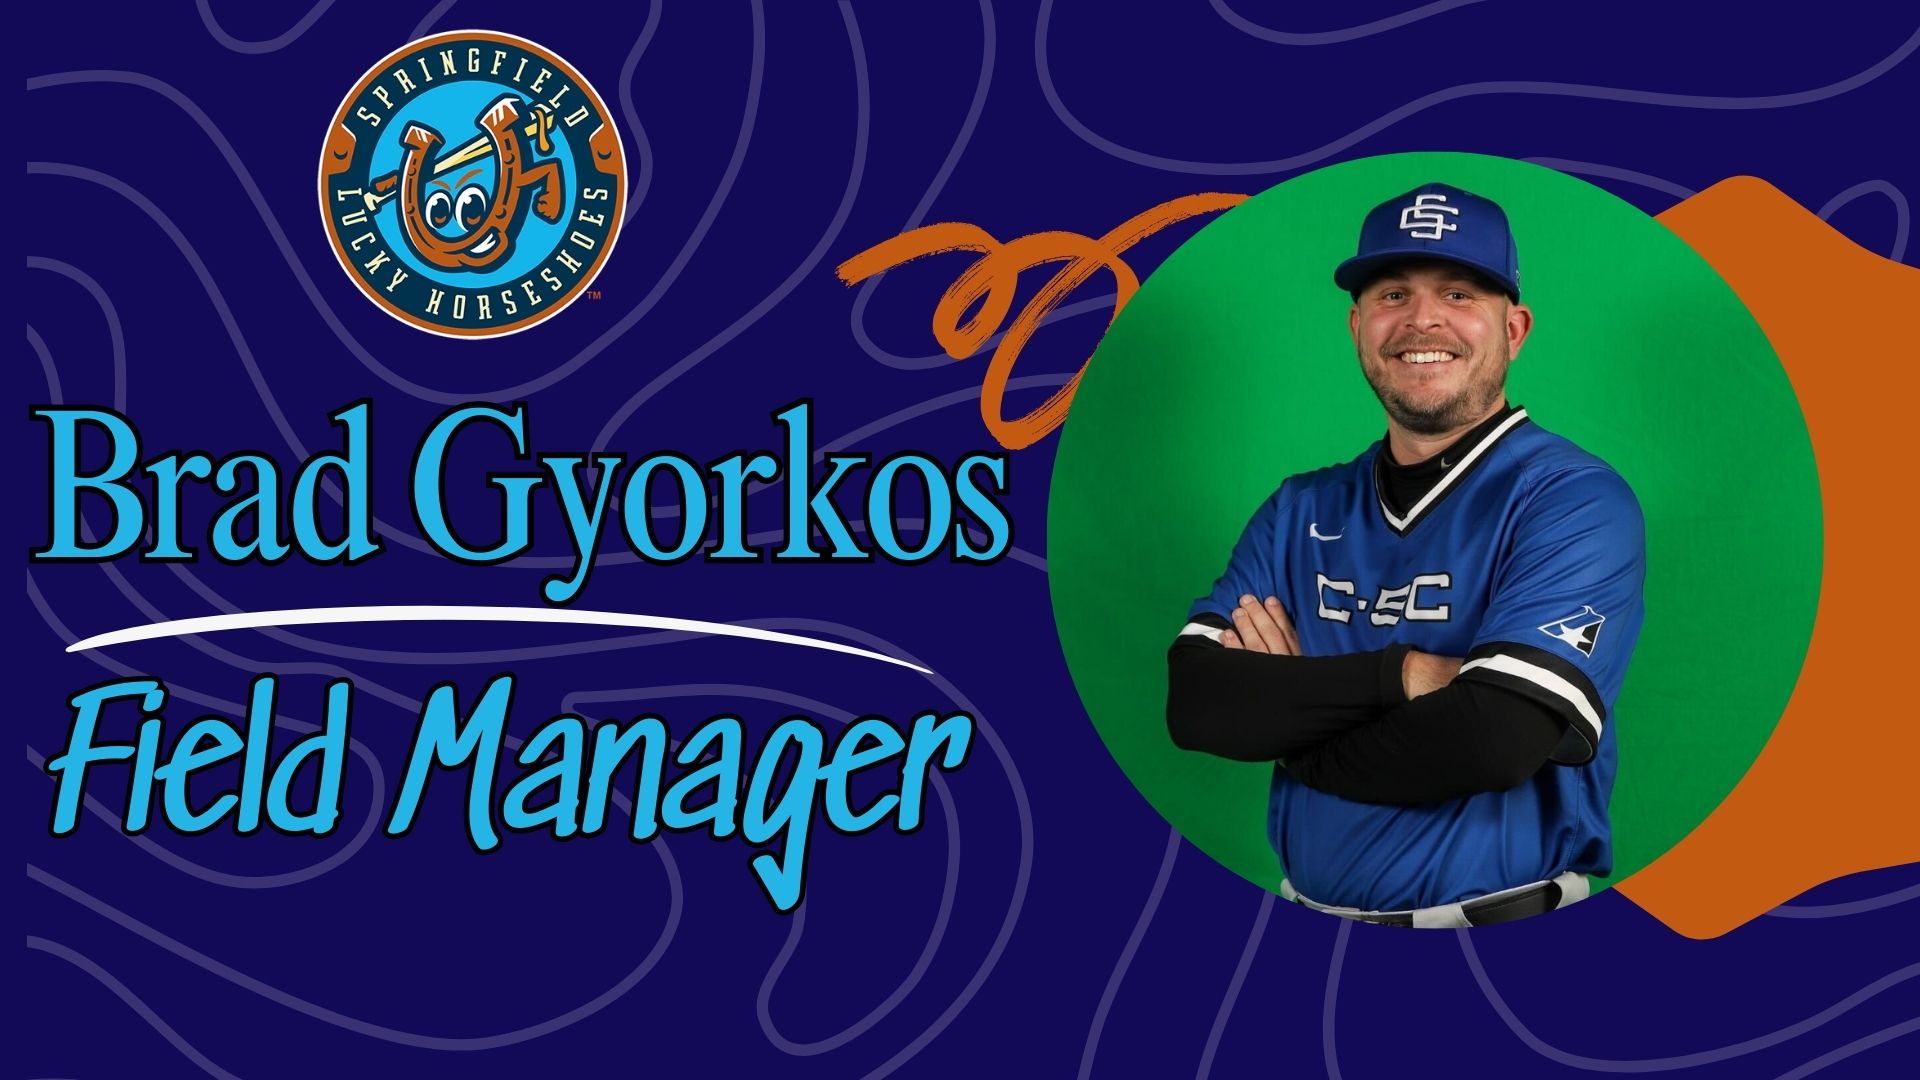 'Shoes Announce Brad Gyorkos As Field Manager